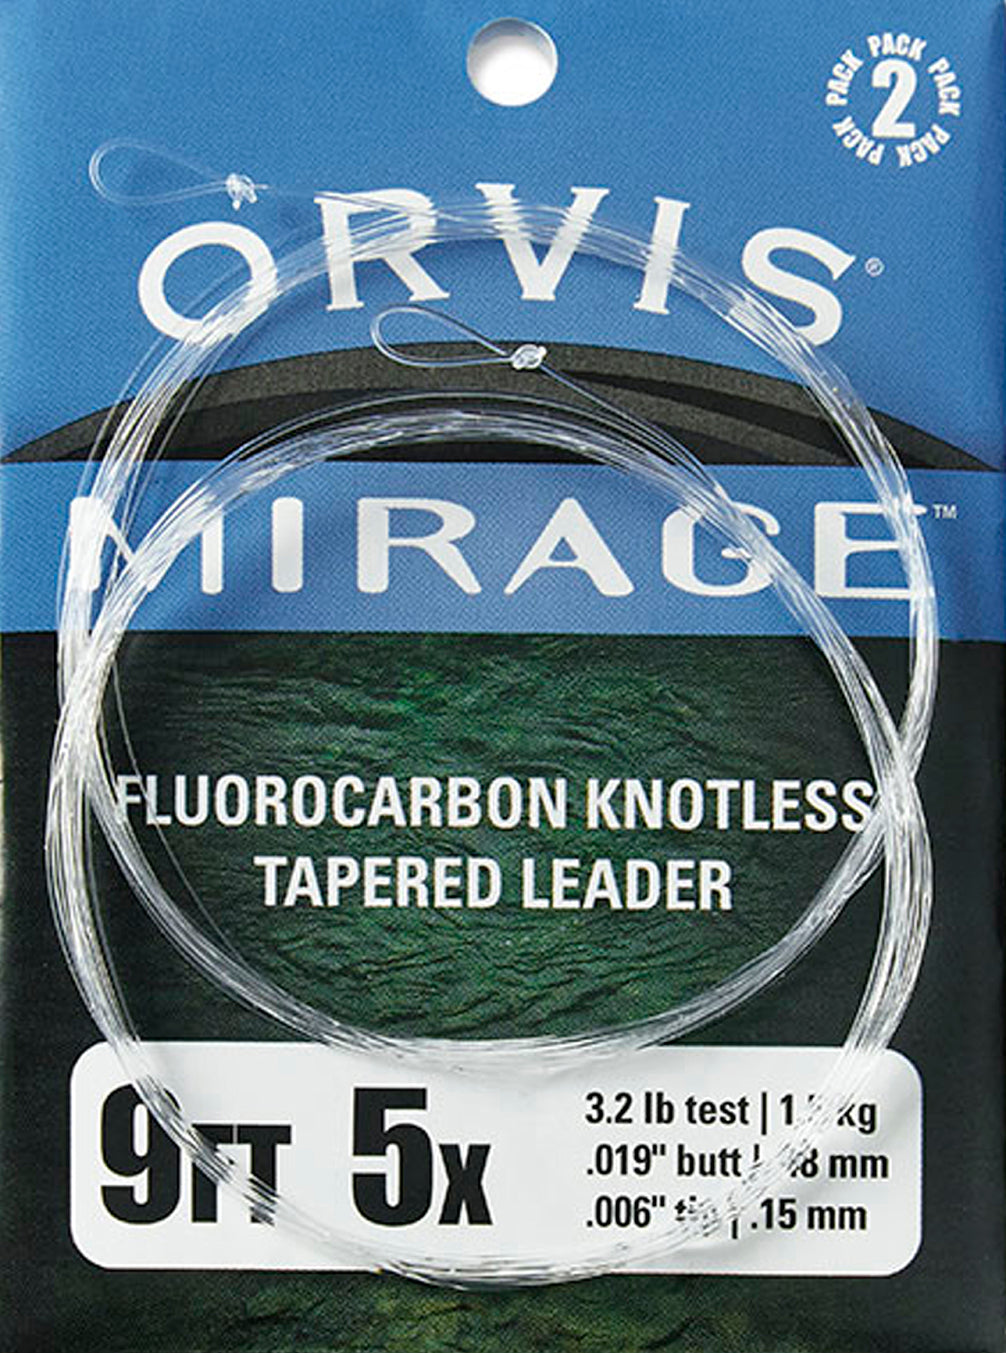 Orvis Mirage Fluoracarbon Trout Knotless 9' Leader (2 pack